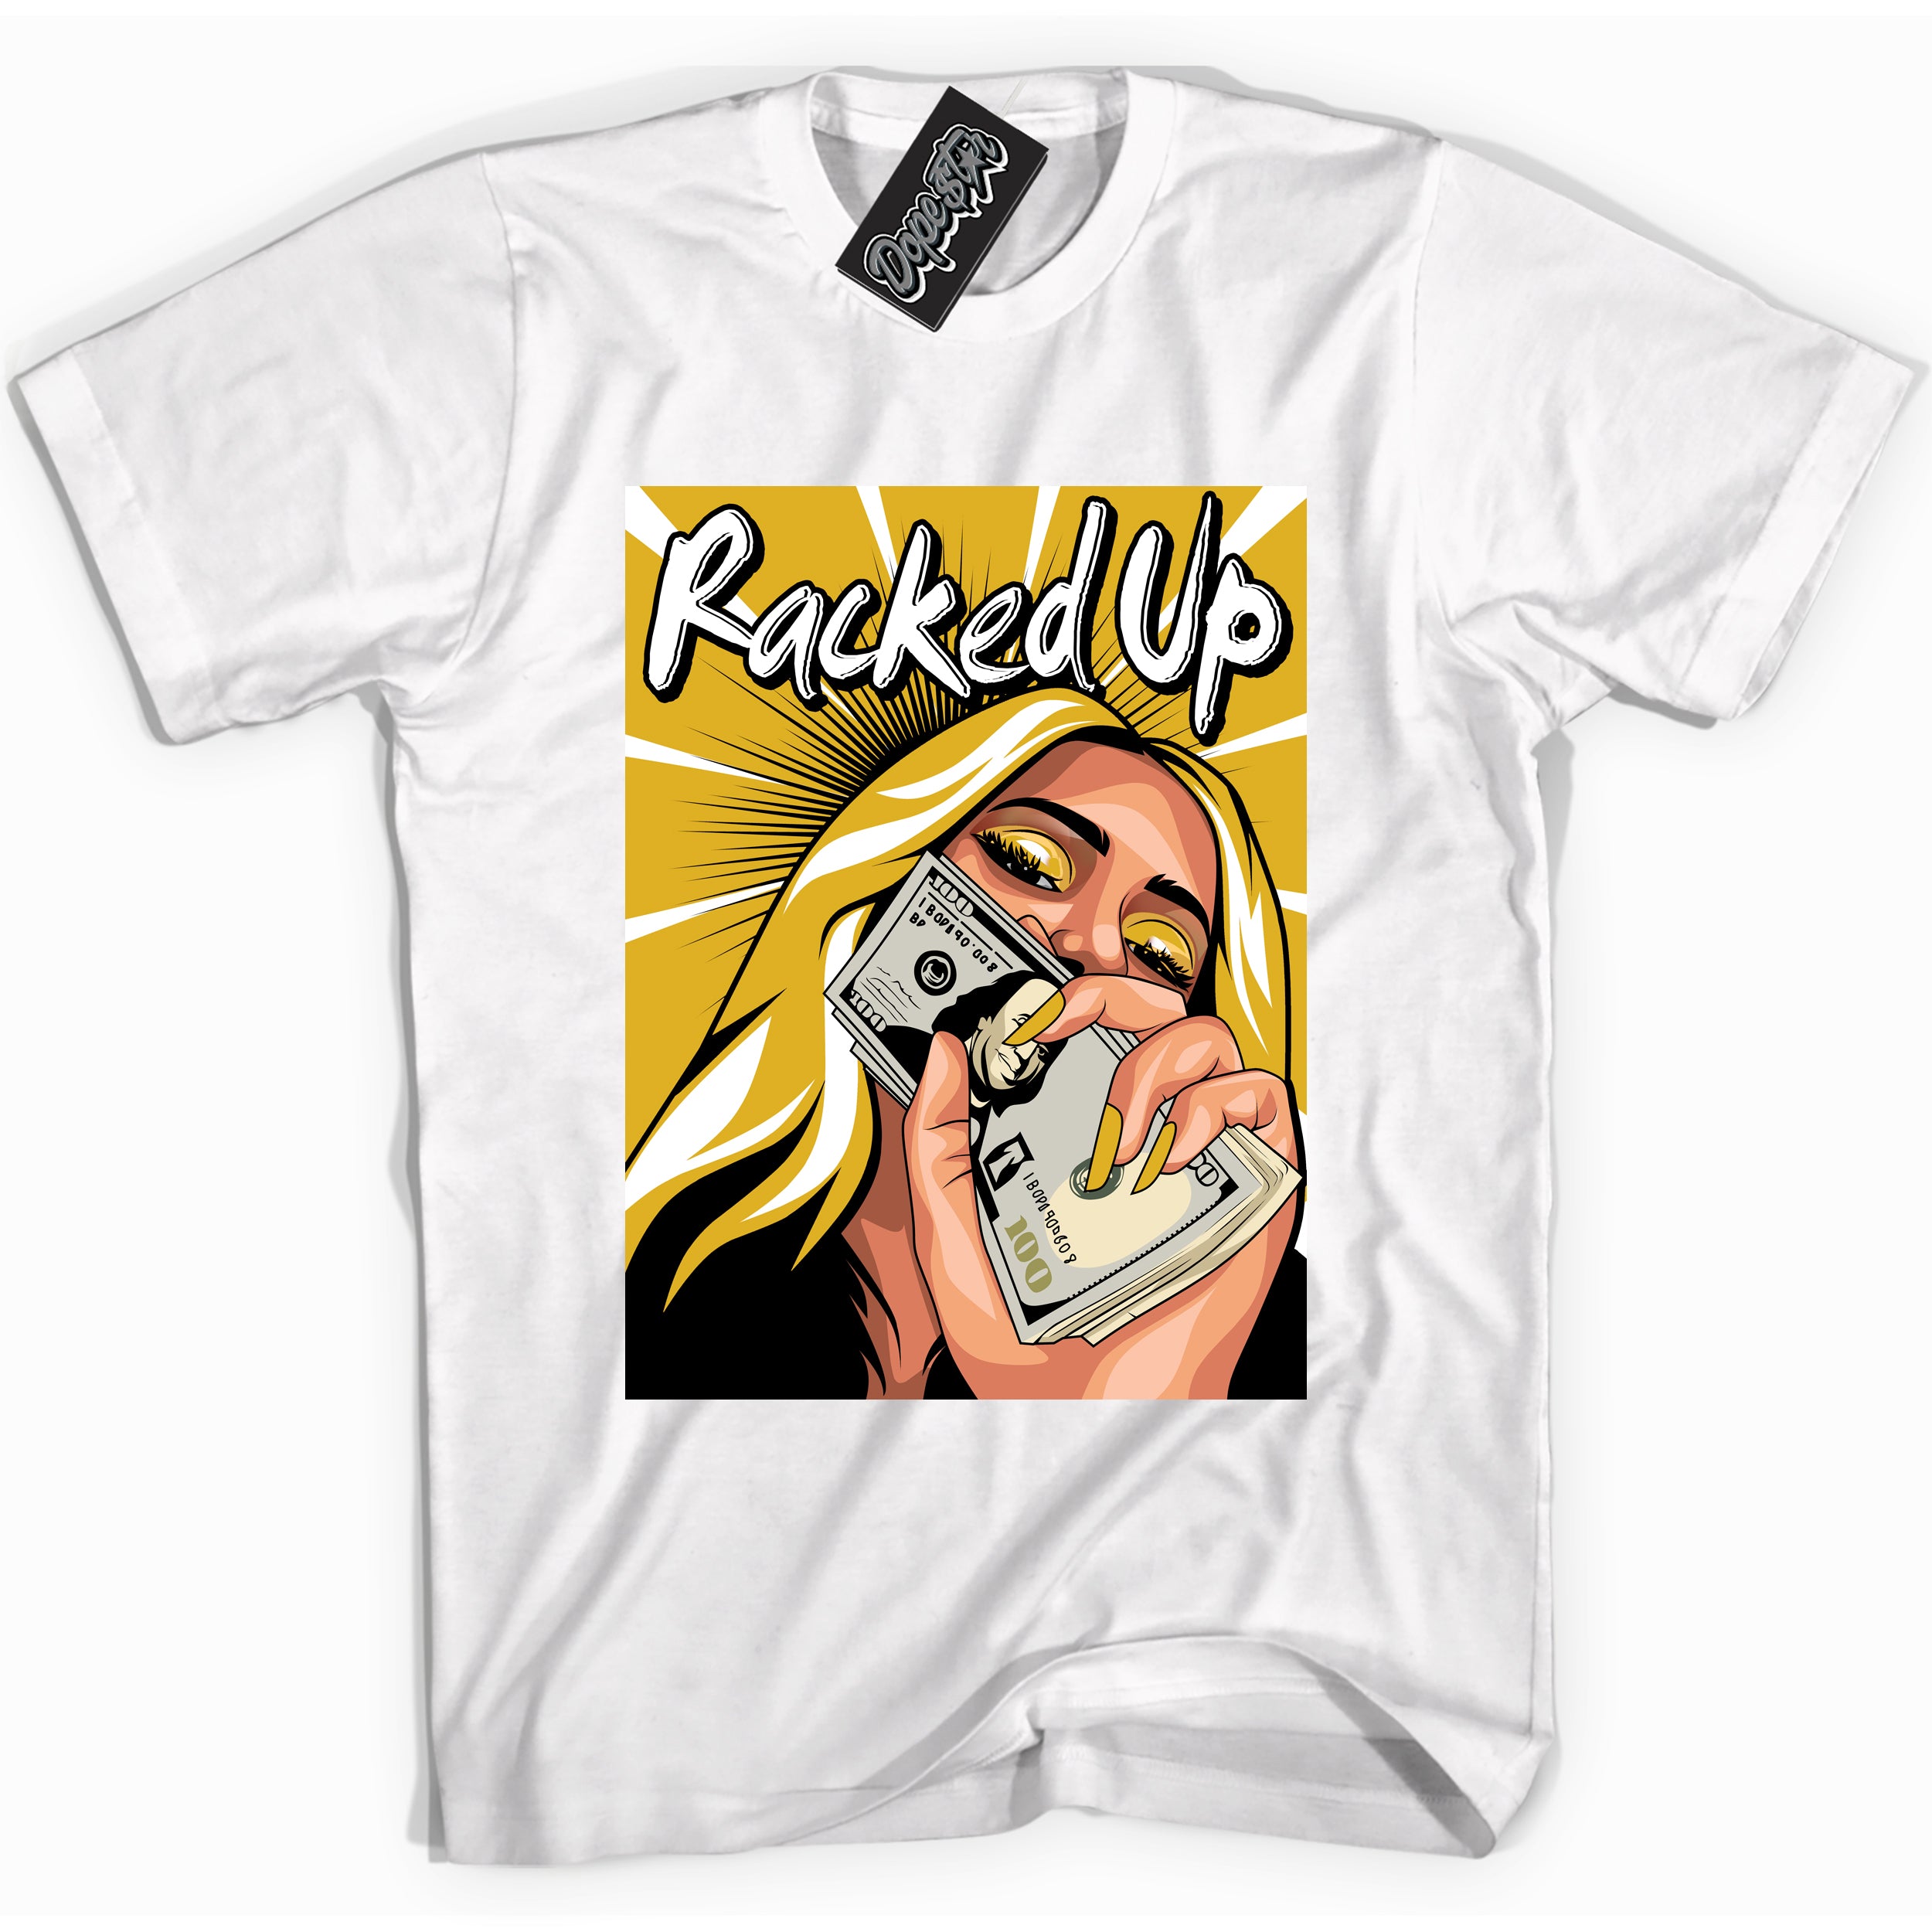 Cool white Shirt with “ Racked Up ” design that perfectly matches Yellow Ochre 6s Sneakers.